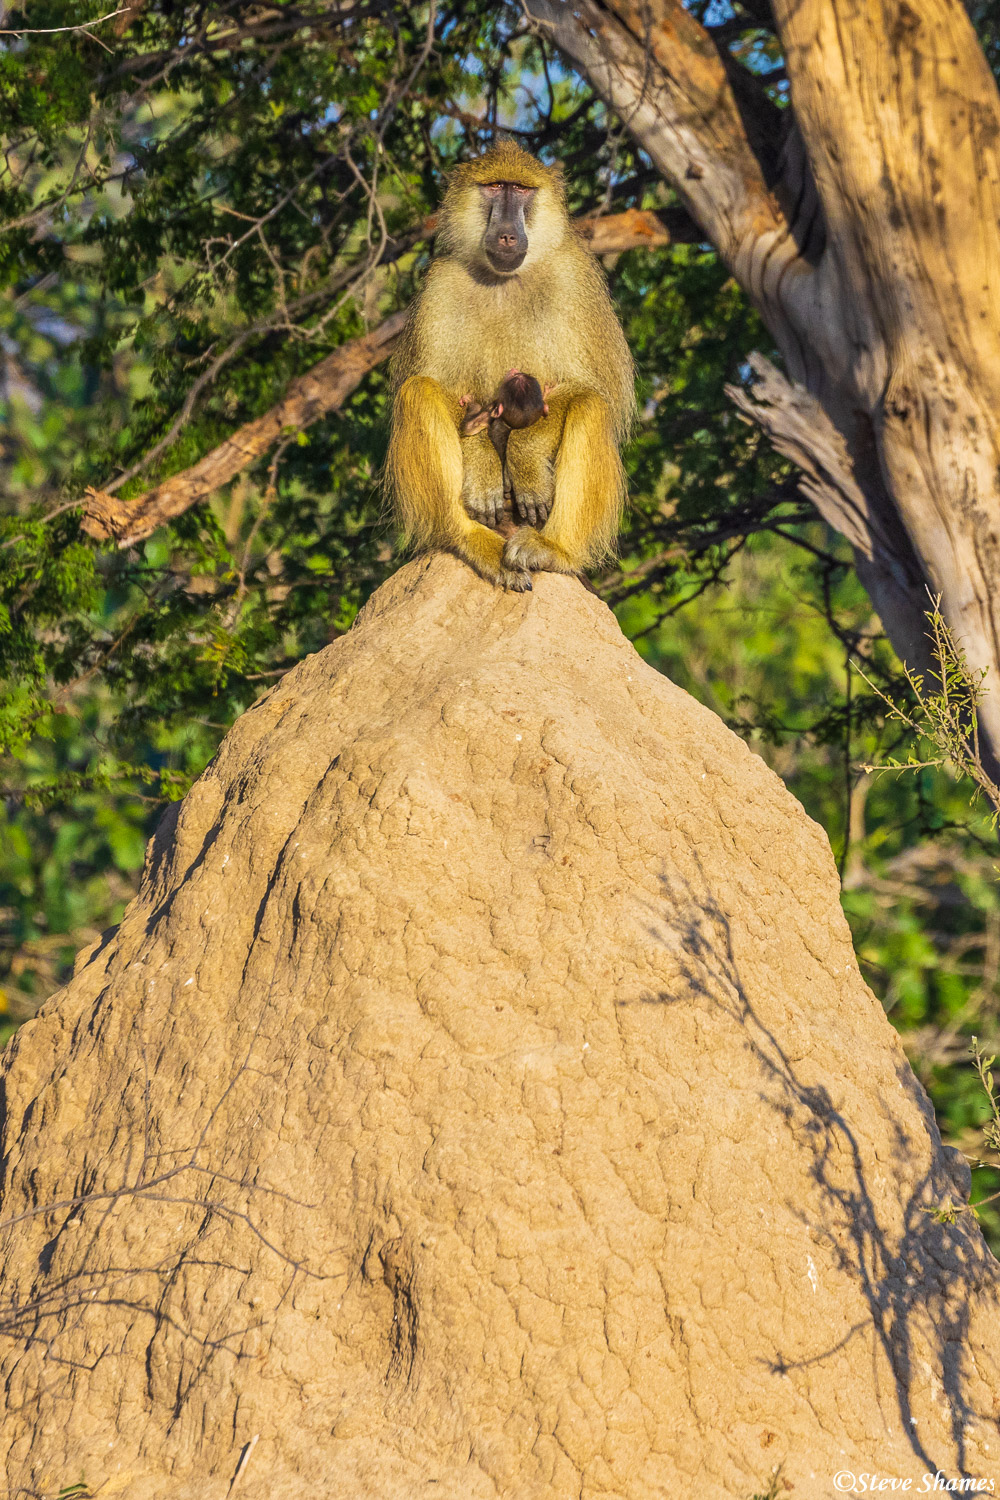 This baboon with the baby is currently the king of the hill -- or actually, king of the termite mound.